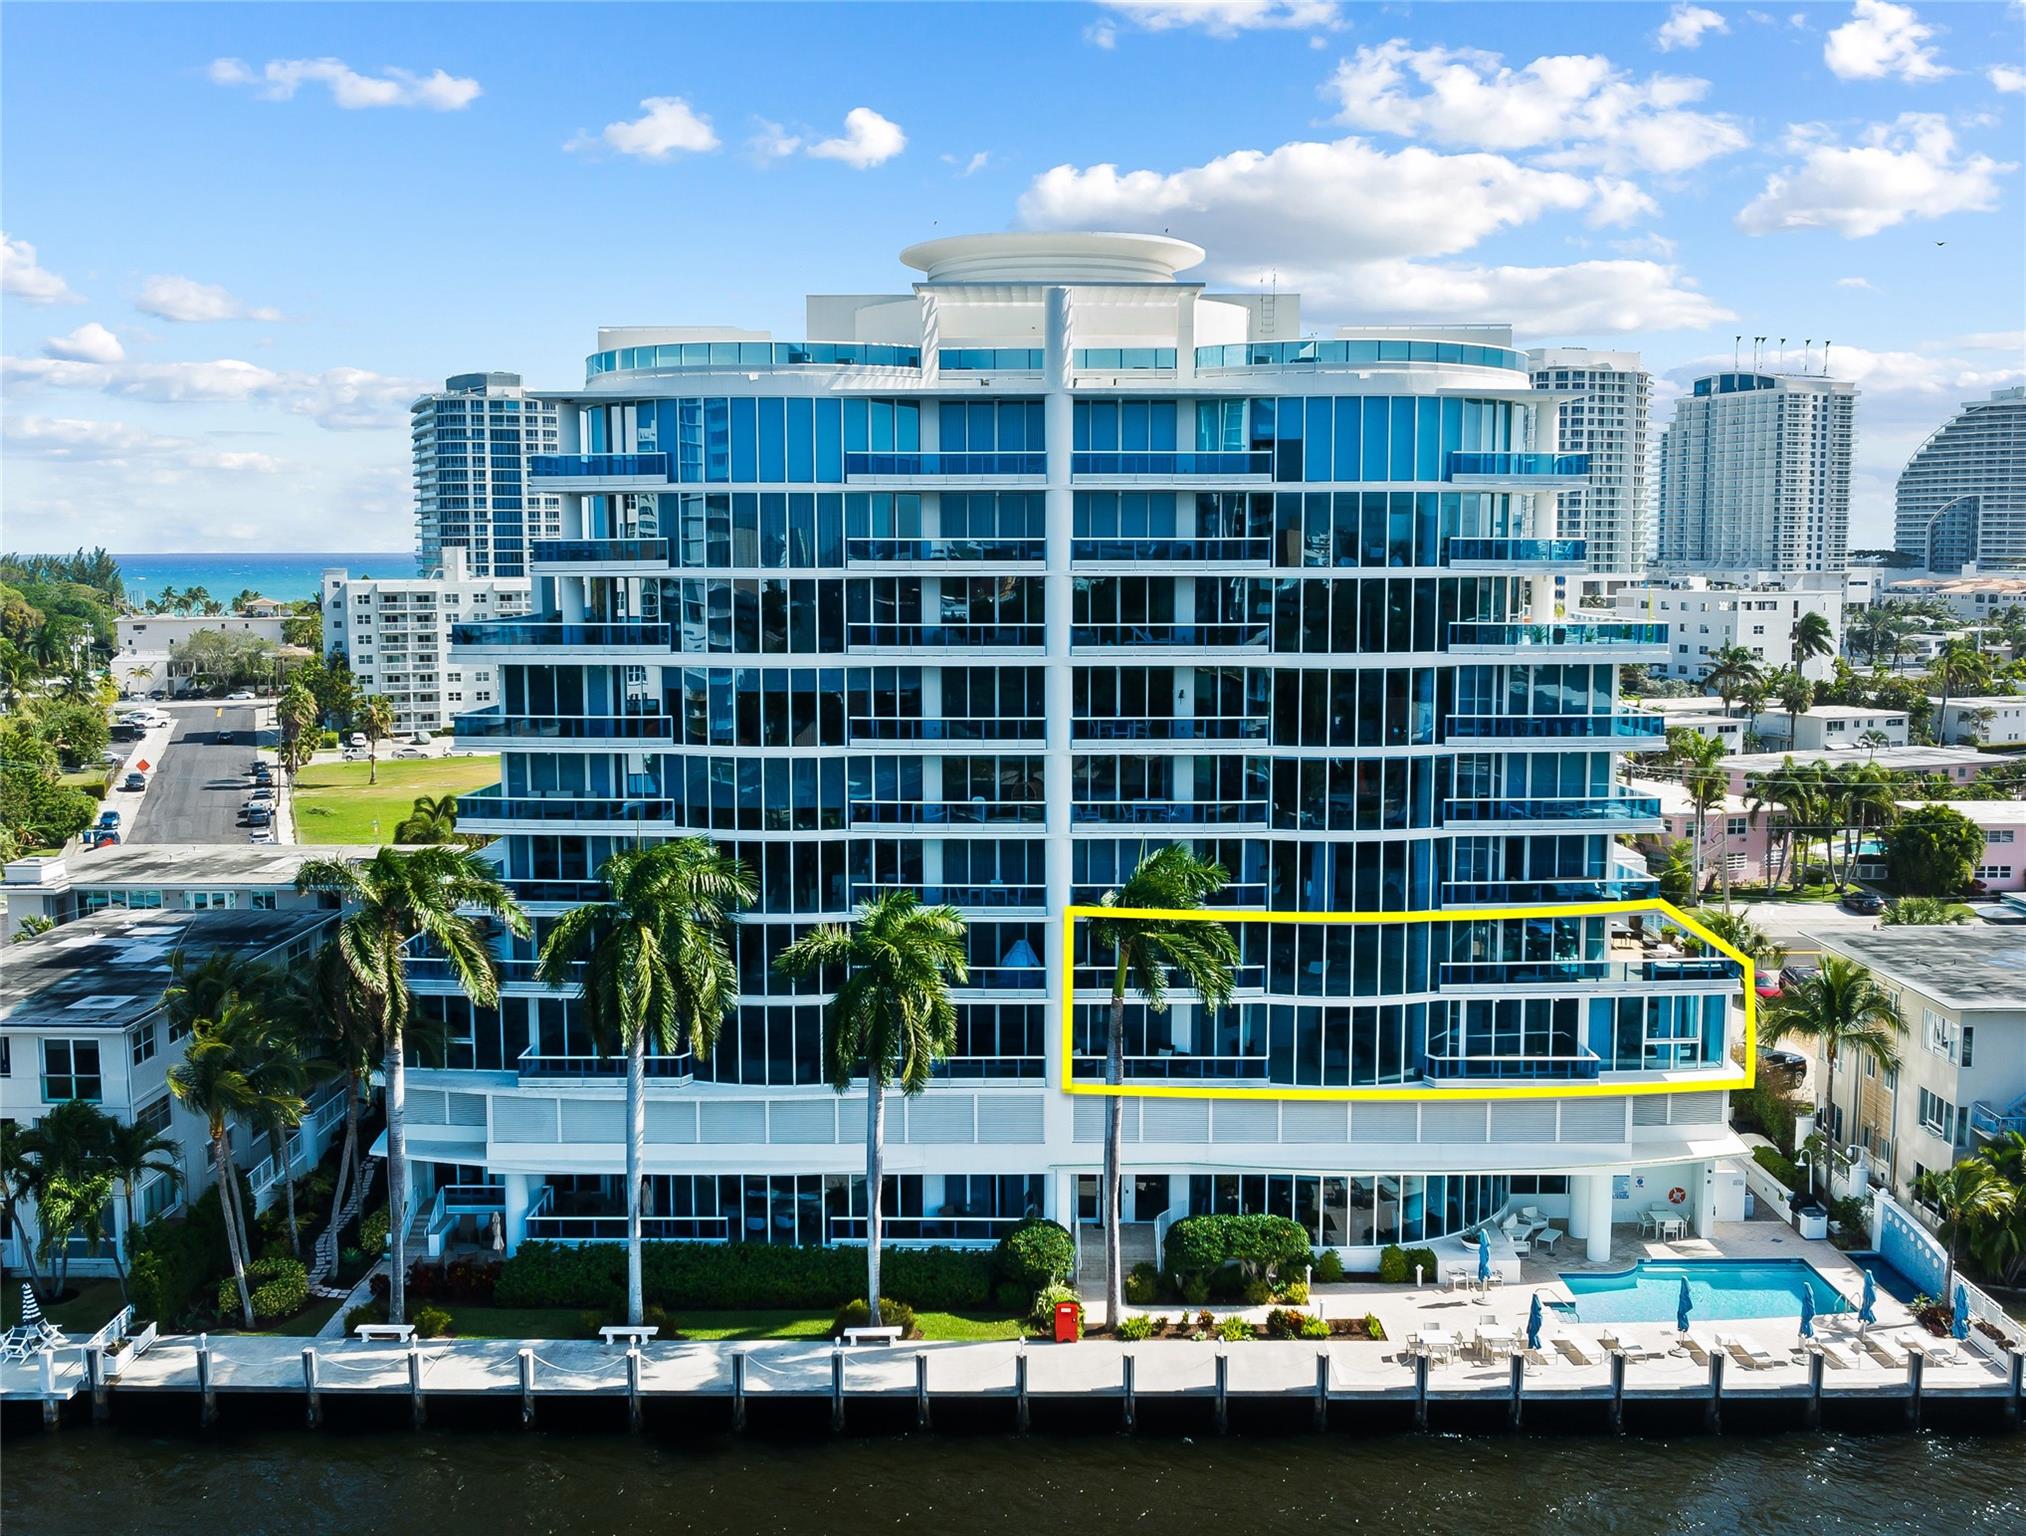 Rare to find, this TWO-STORY condo was designed to give the highest precedence to Waterfront living. With DIRECT INTRACOASTAL views and over 5600 sf of Indoor/Outdoor living space, it feels like a home on the water. The MAIN LEVEL encompasses a Living Room, Dining room, Den which can be a fourth bedroom or office, a large Kitchen, and the Primary Suite. The SECOND FLOOR accessed by a glass-walled spiral Staircase features a spacious Family Room and two Bedrooms both ensuite. Captivating sunsets and an endless parade of boats can be enjoyed from any of four balconies, including a wraparound terrace great for entertaining. THREE PARKING SPACES, two with direct access into the unit. La Rive is a sophisticated boutique building with a full-time Doorman, pool, fitness center, & clubroom.